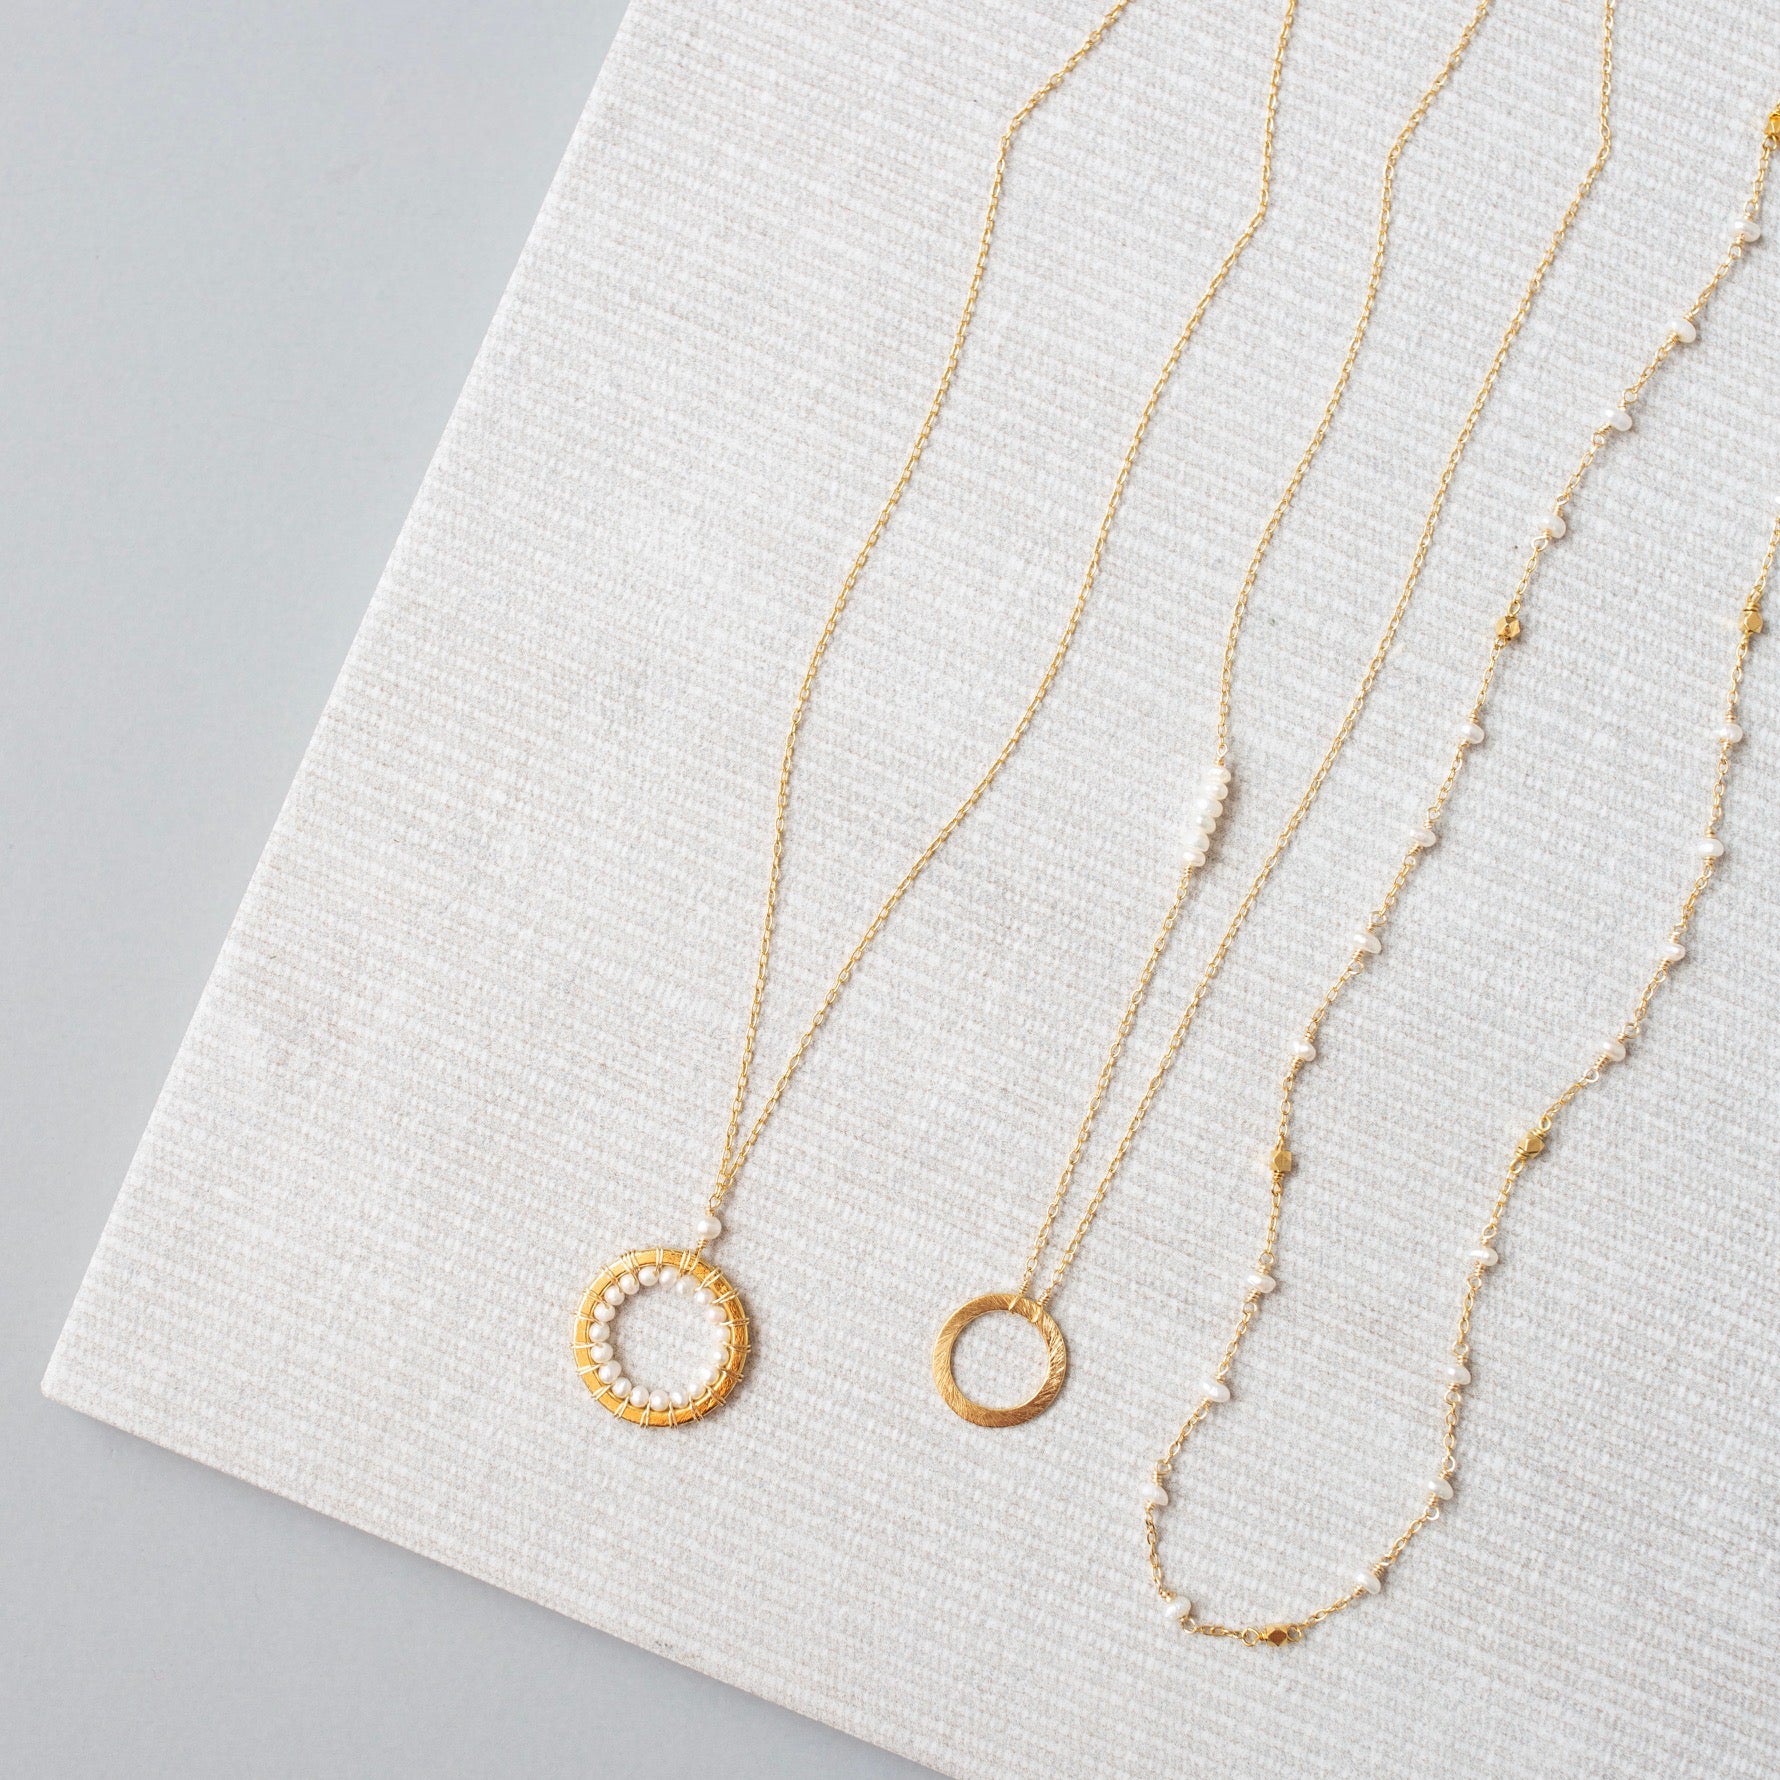 Adjustable Delicate Chain with the Look of Spun Gold features freshwater pearls